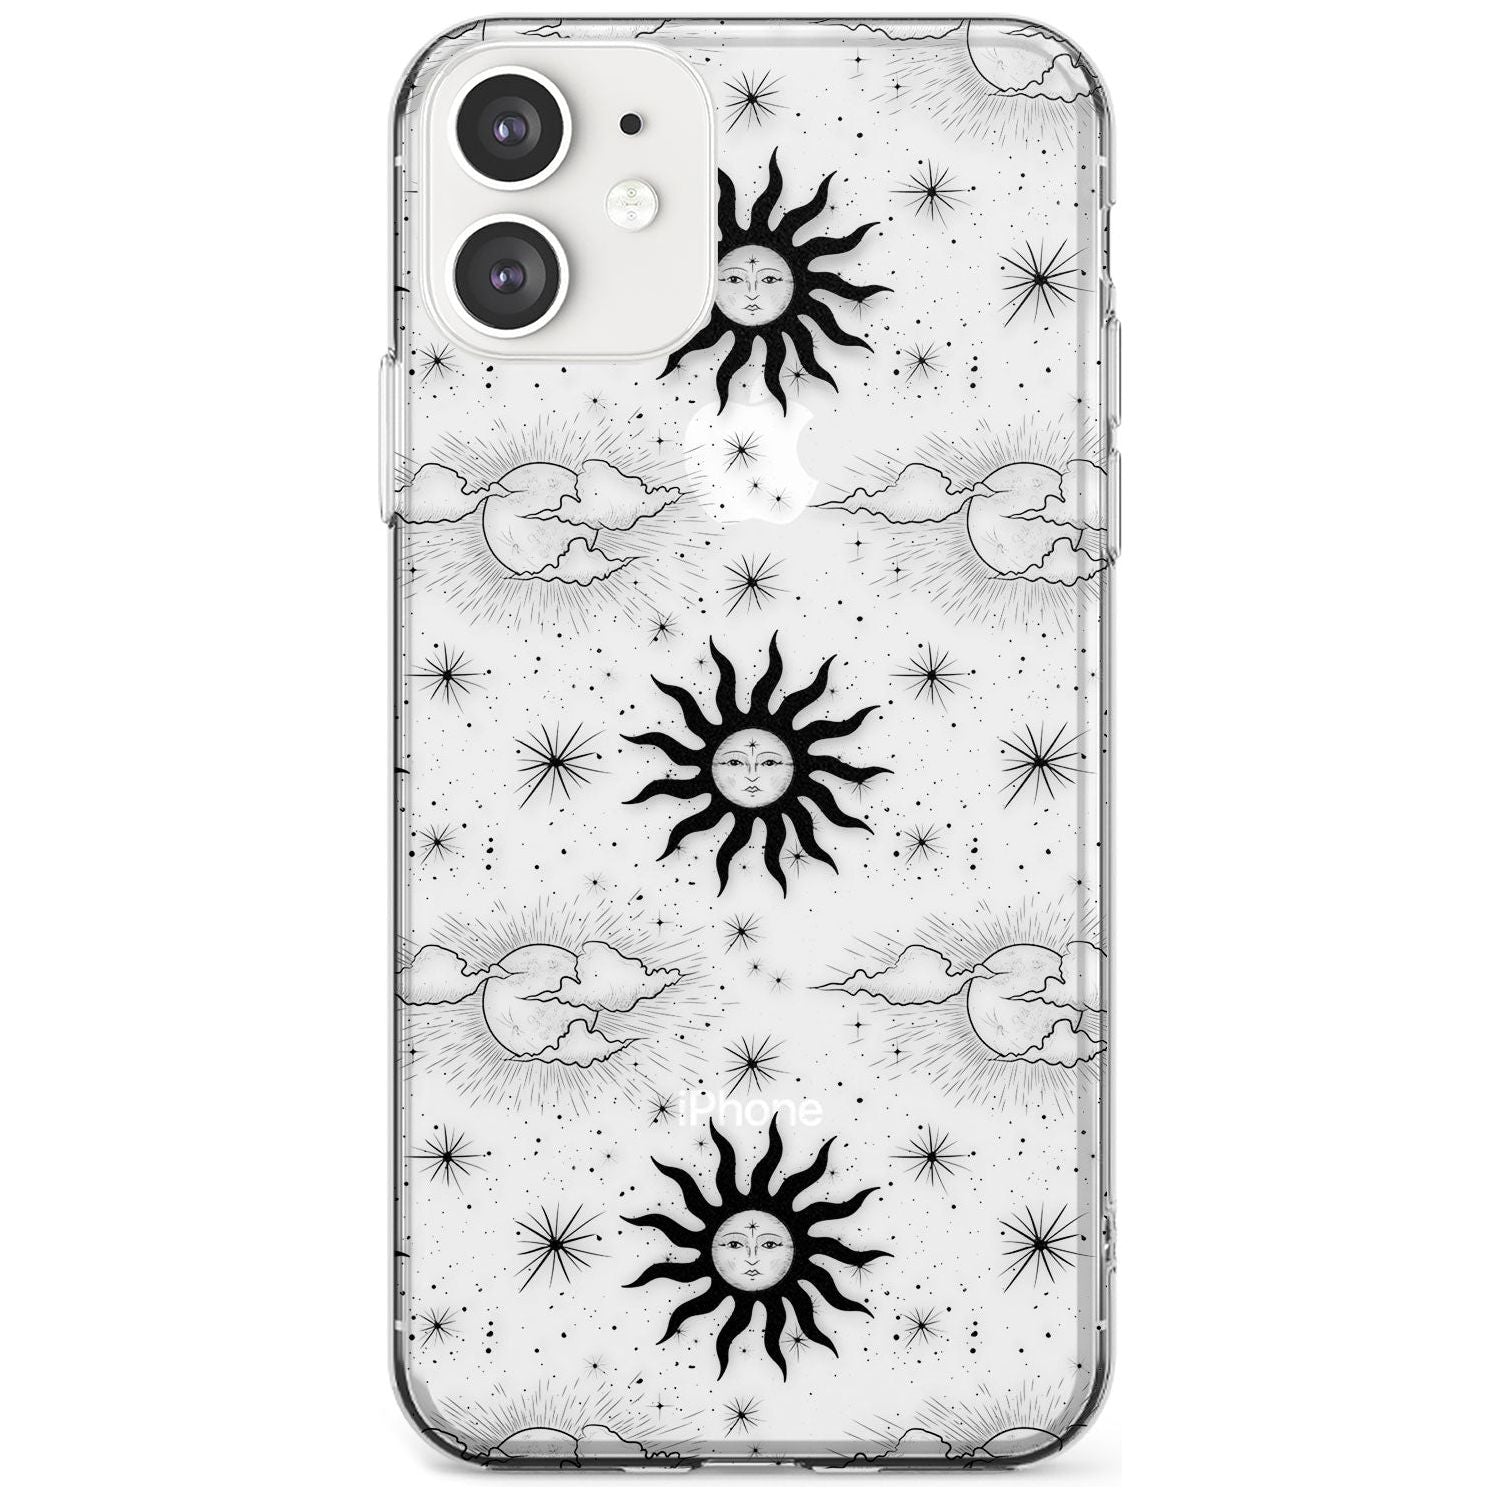 Suns & Clouds Vintage Astrological Slim TPU Phone Case for iPhone 11